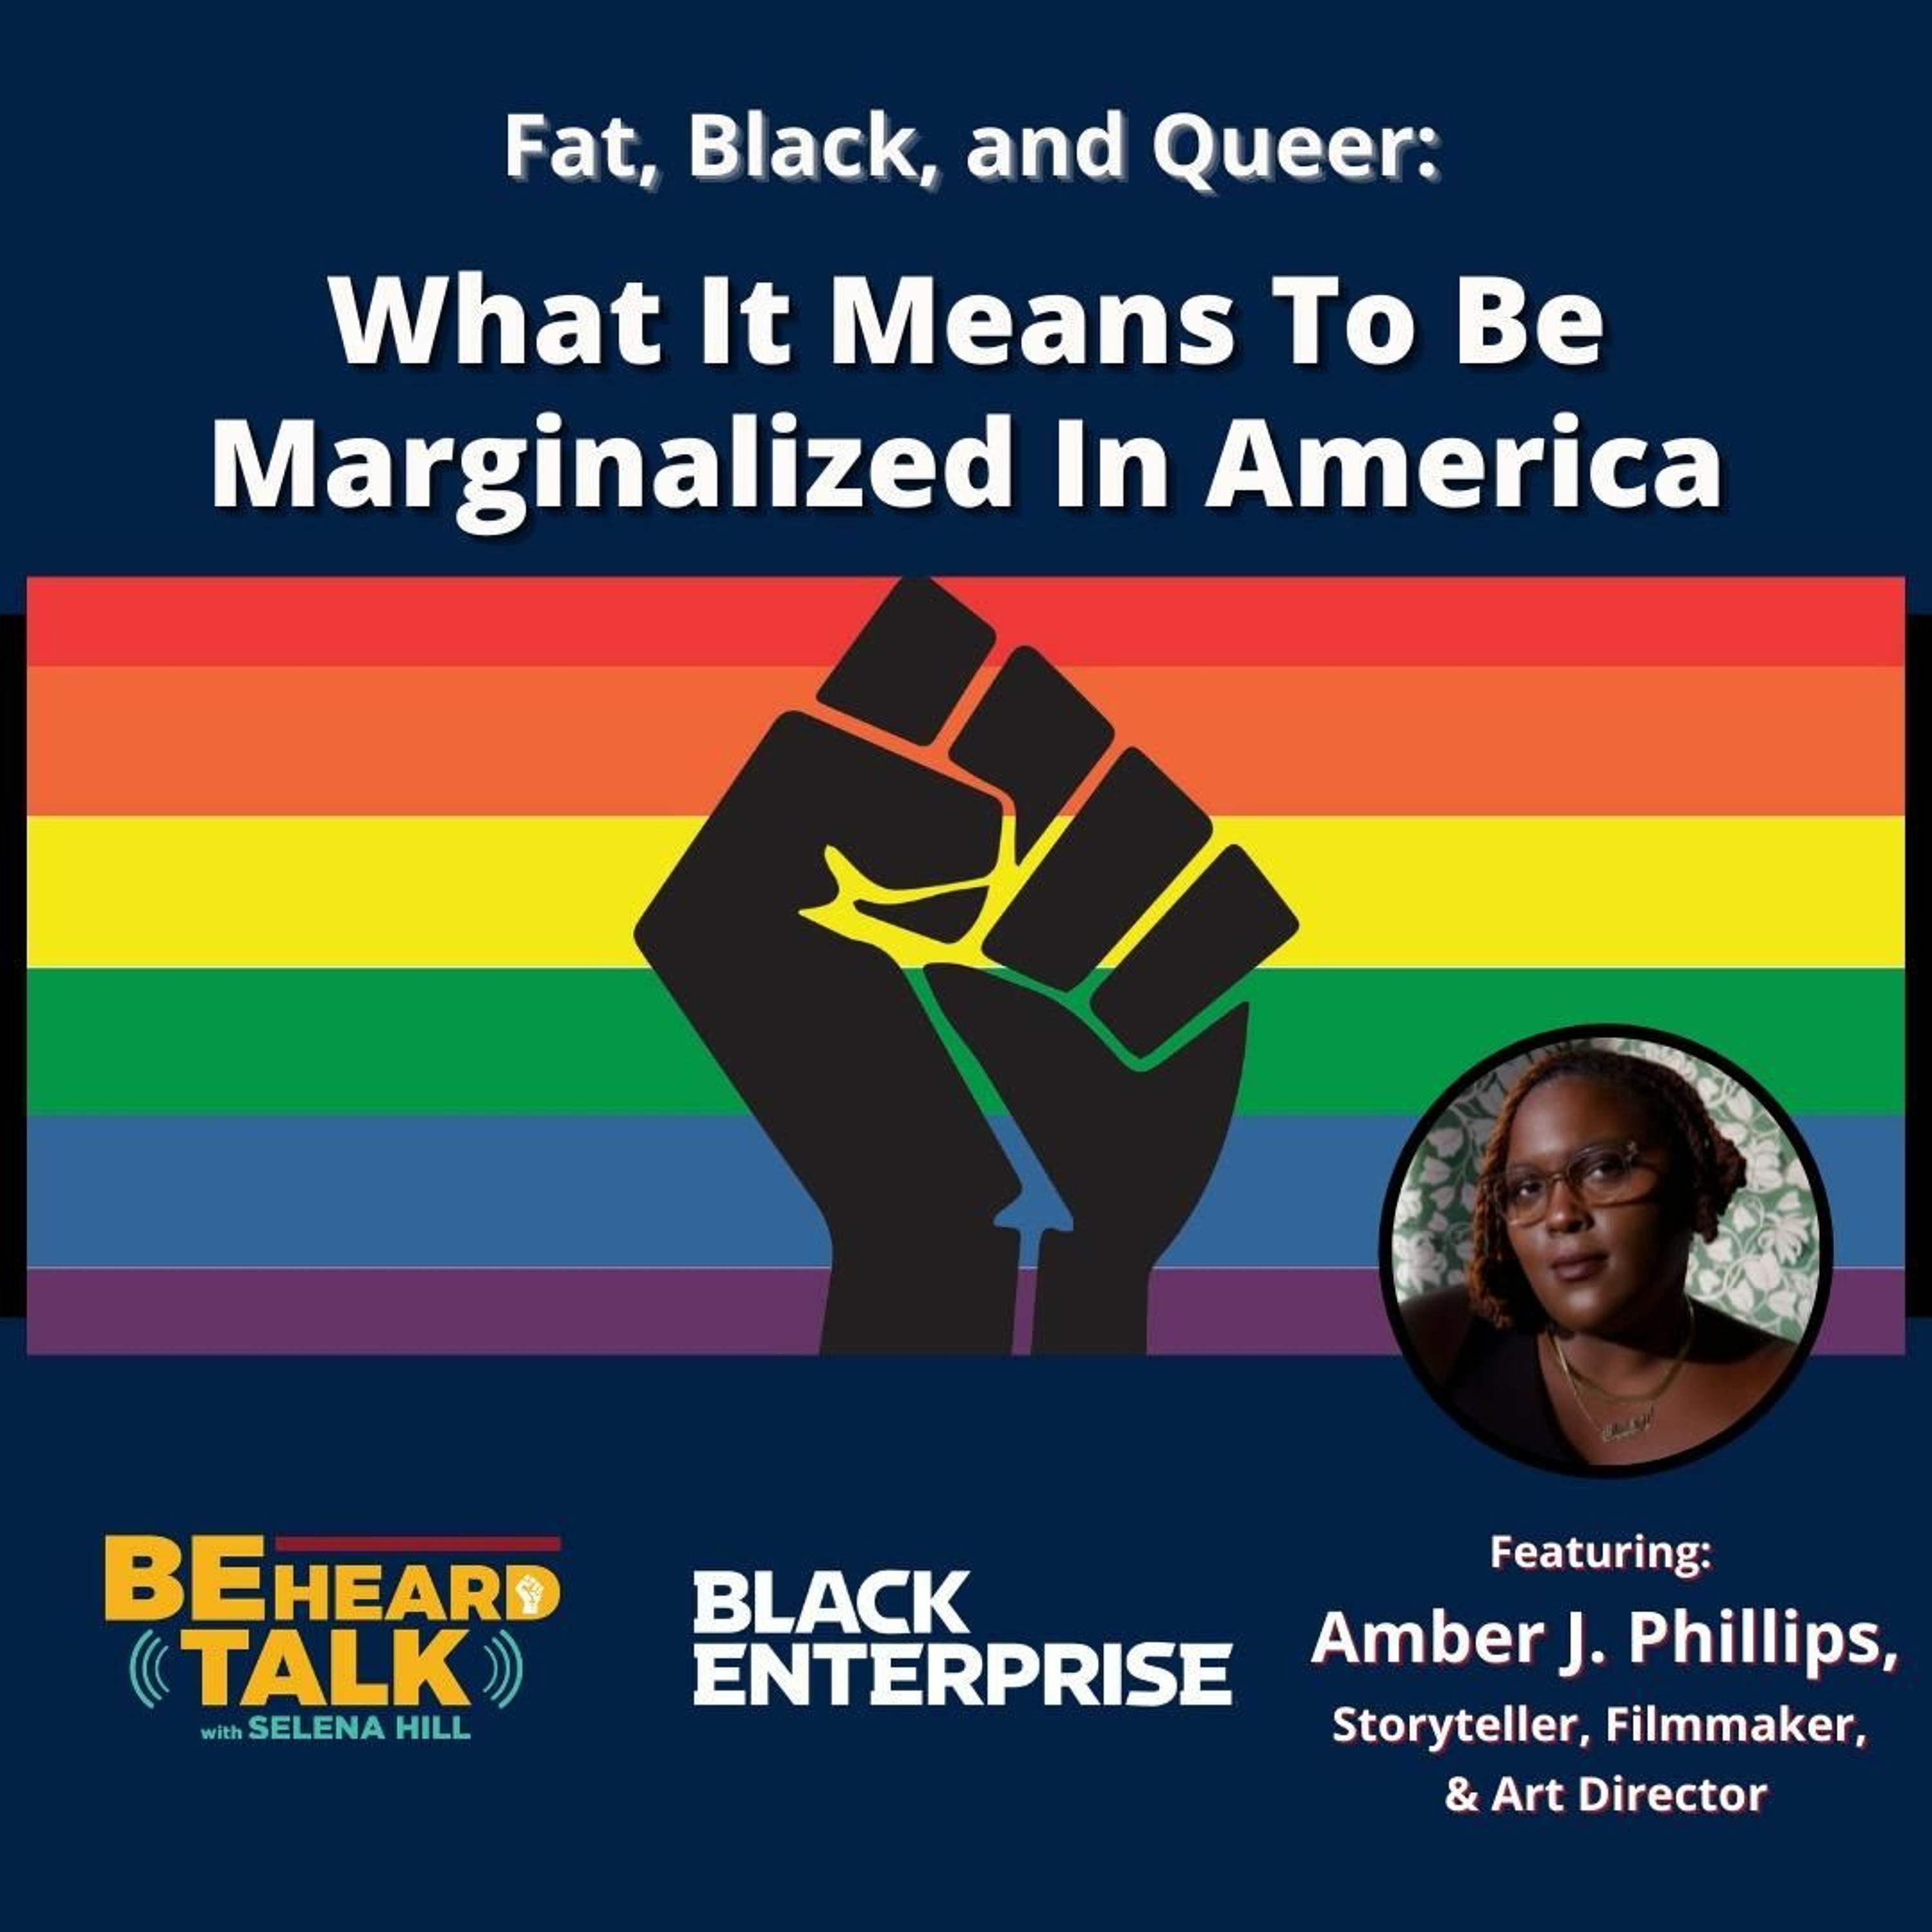 Fat, Black, And Queer:  What It Means To Be Marginalized In America